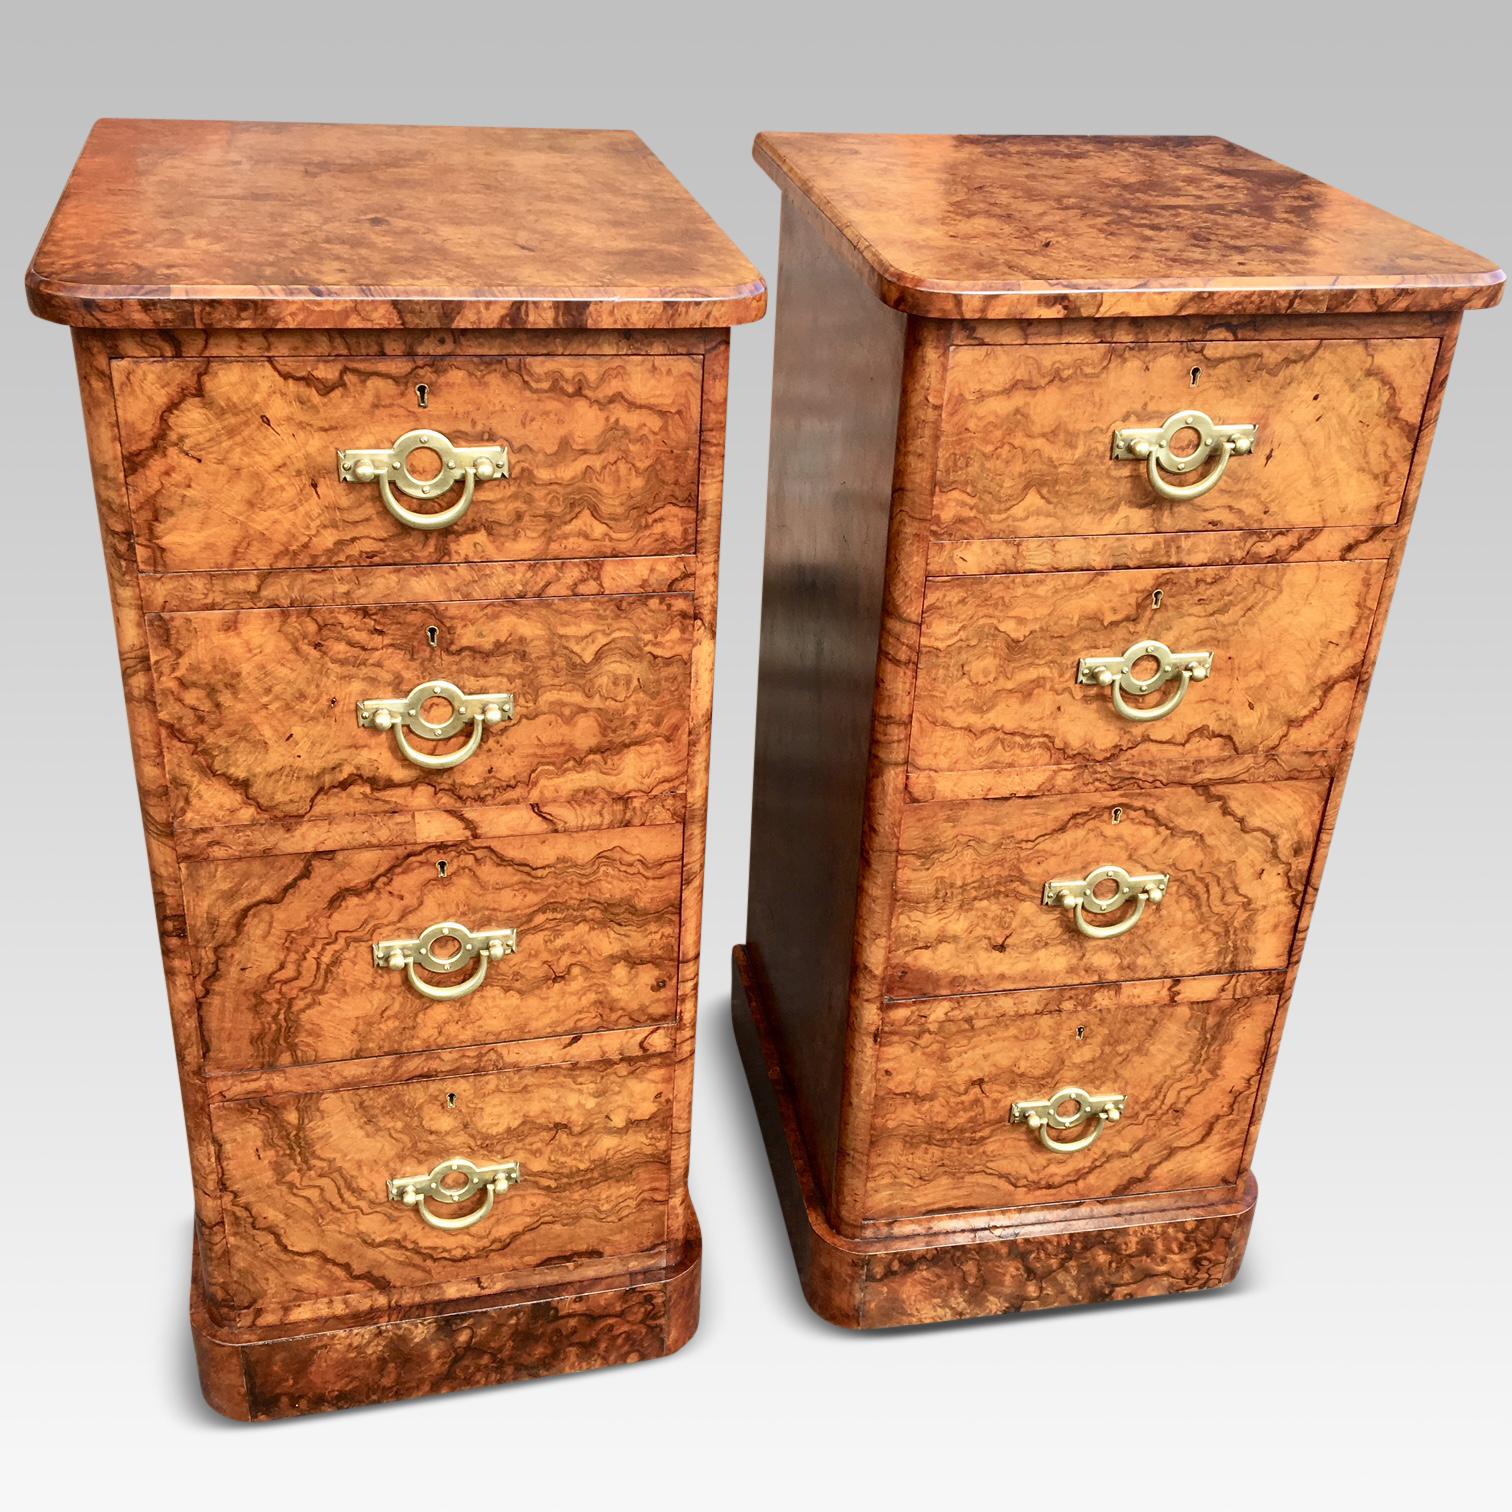 Fine quality pair of English figured walnut bedside cabinets with original brass handles, circa 1880.

These stunning cabinets are 34.5 ins high, 16.5 ins wide and 18 ins deep. There are four smoothly running drawers to each cabinet, all beautifully